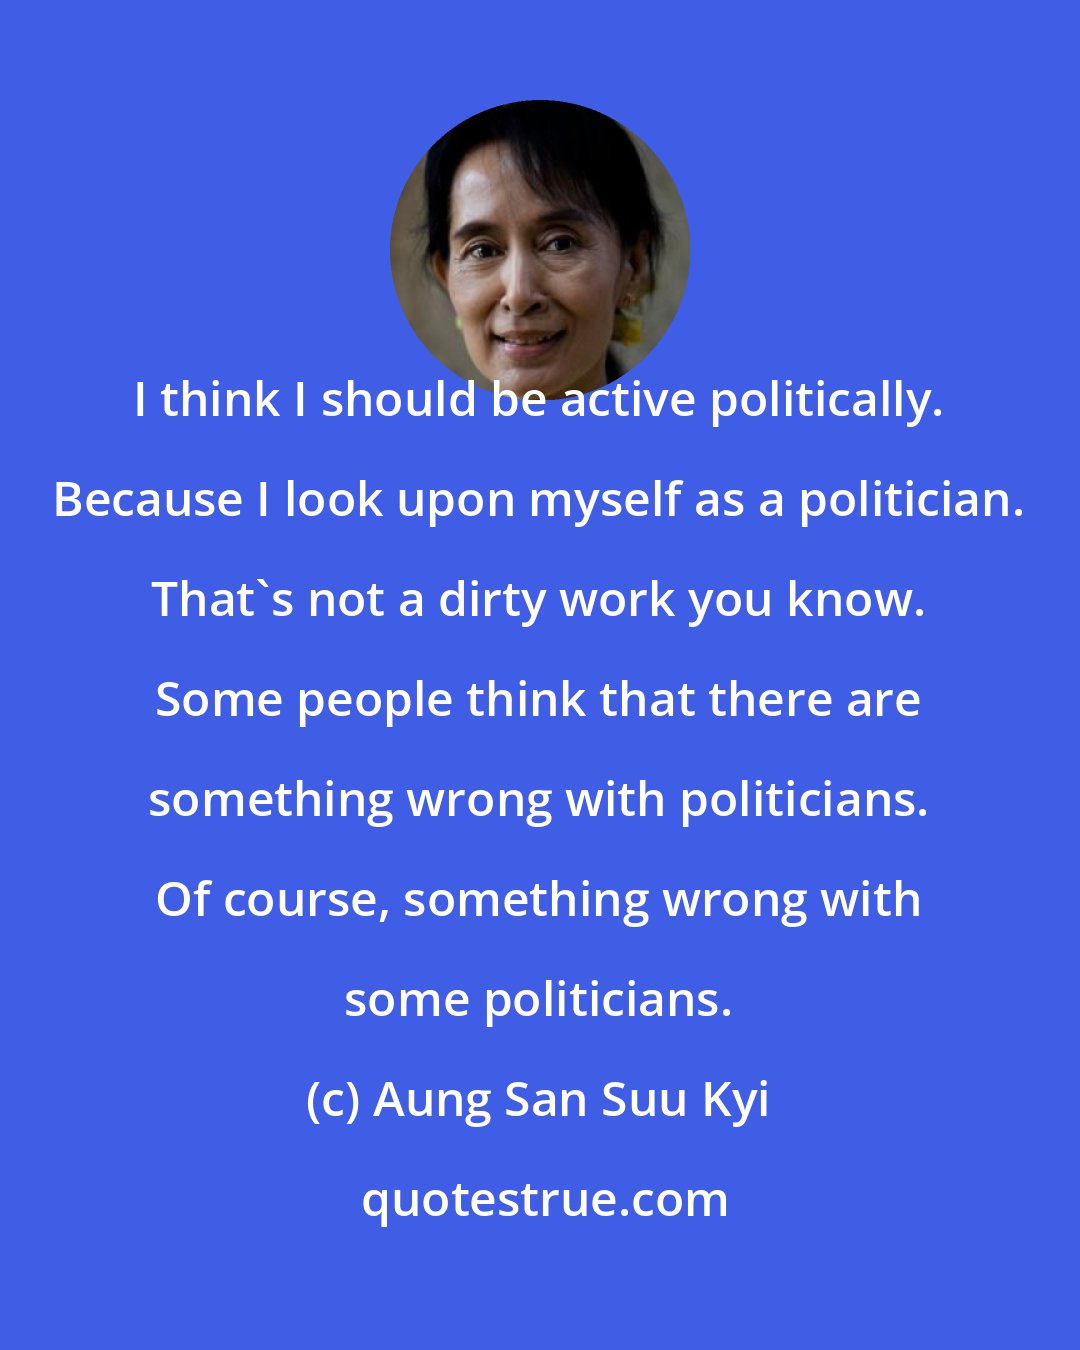 Aung San Suu Kyi: I think I should be active politically. Because I look upon myself as a politician. That's not a dirty work you know. Some people think that there are something wrong with politicians. Of course, something wrong with some politicians.